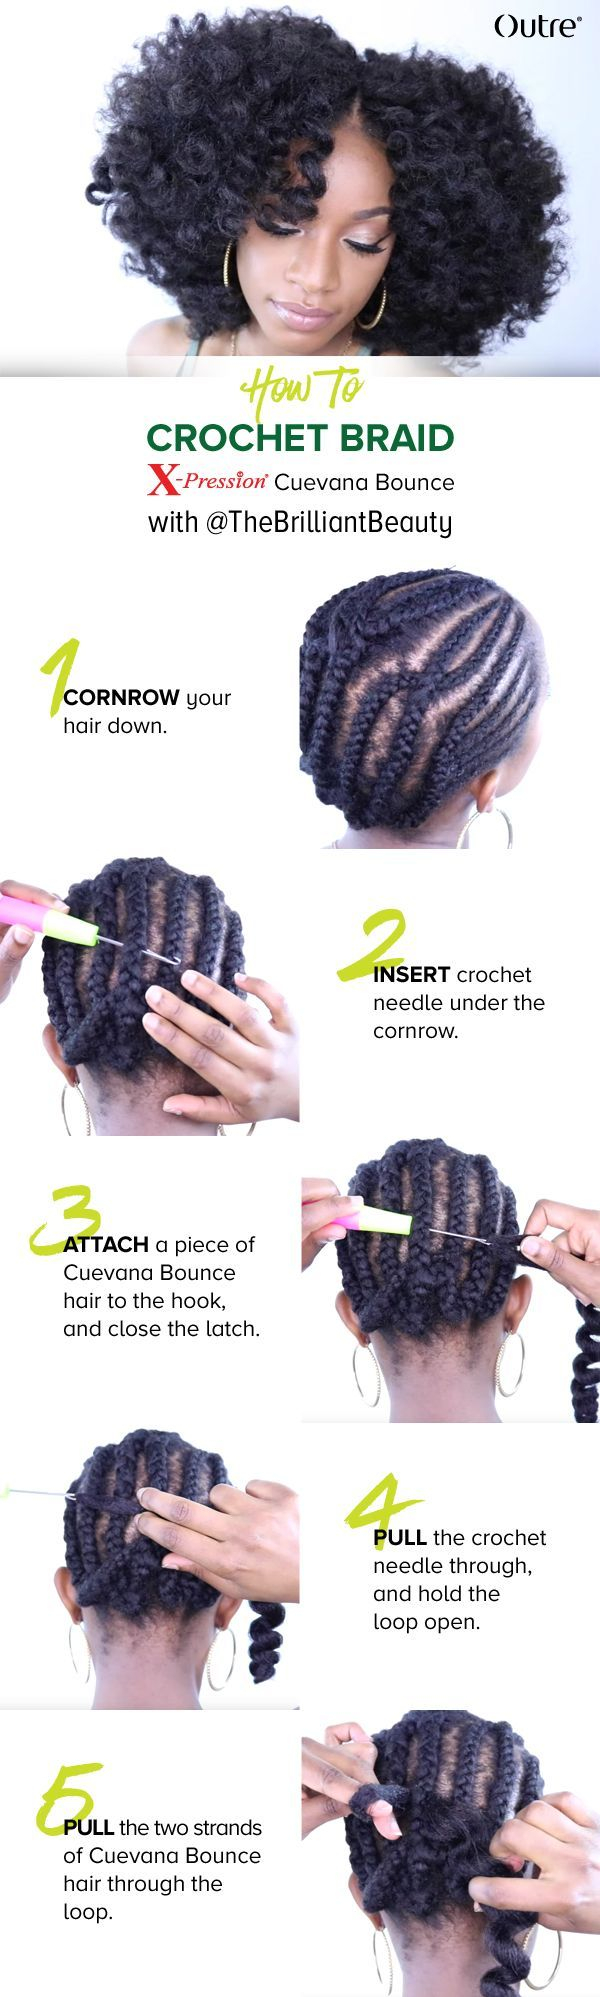 Best Cornrow Pattern For Crochet Braids Learn How To Crochet Braid With Thebrilliantbeauty Outre